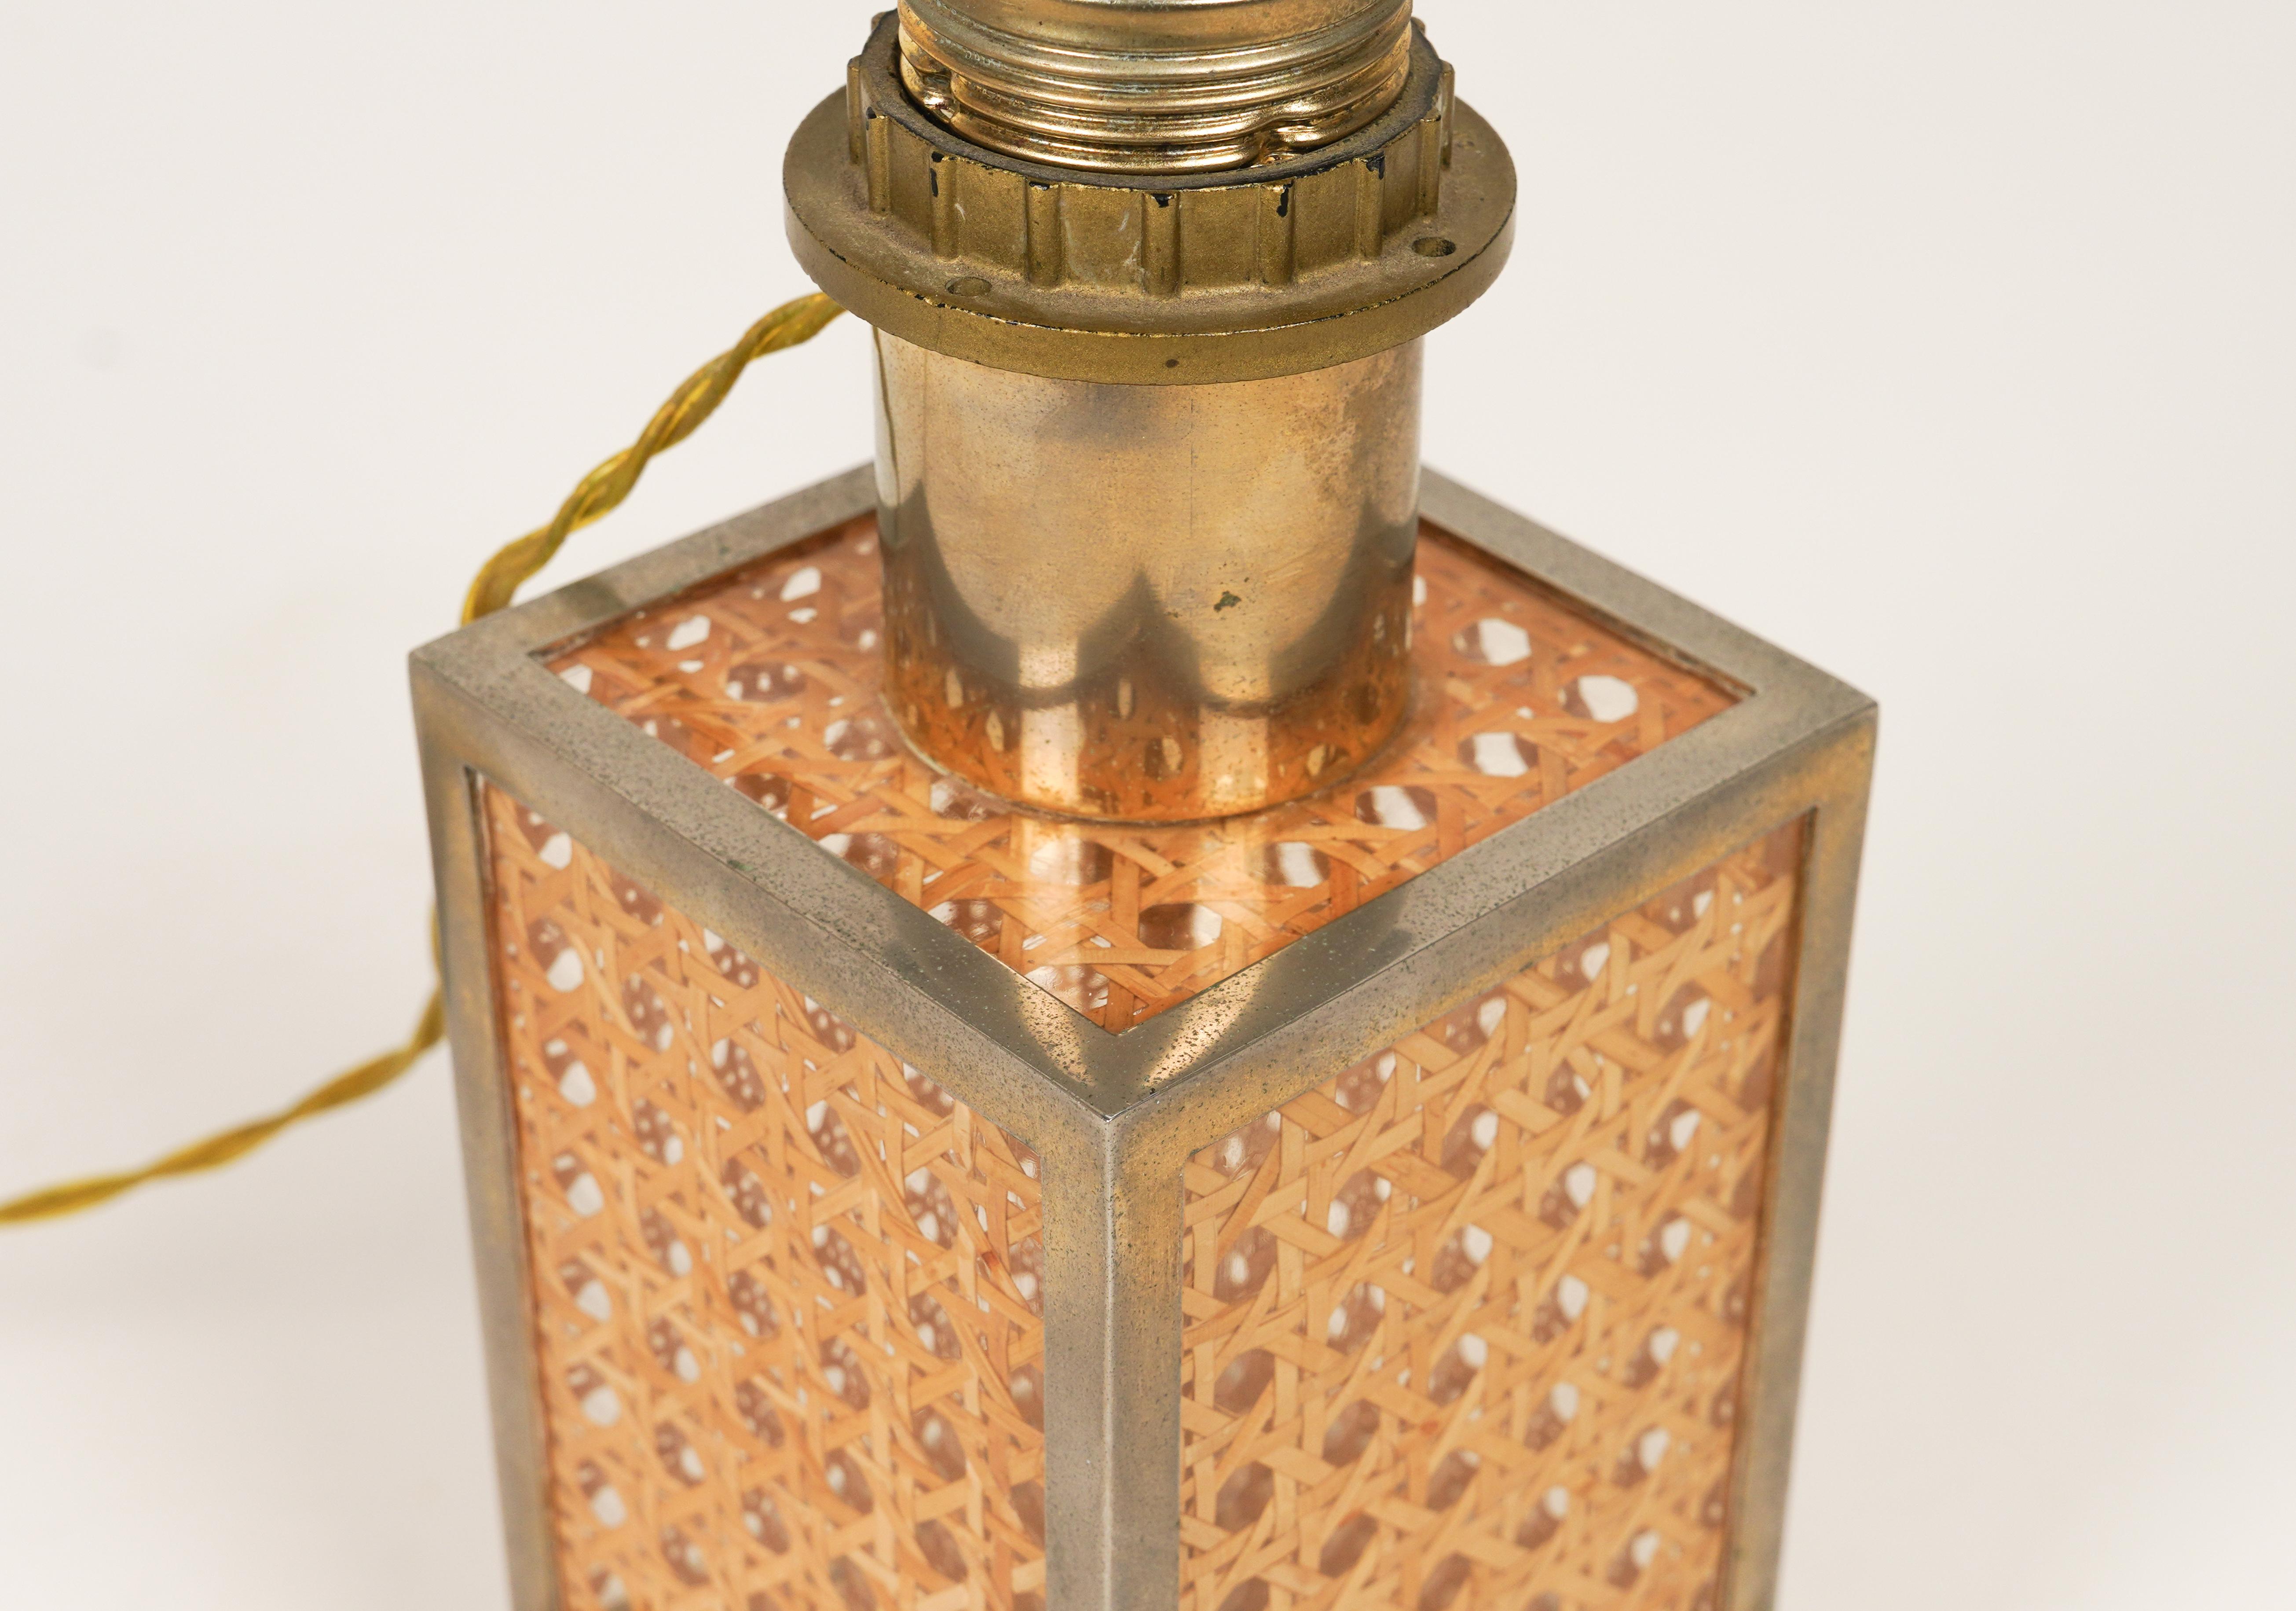 Table Lamp in Lucite, Rattan and Brass Christian Dior Style, Italy 1970s For Sale 4